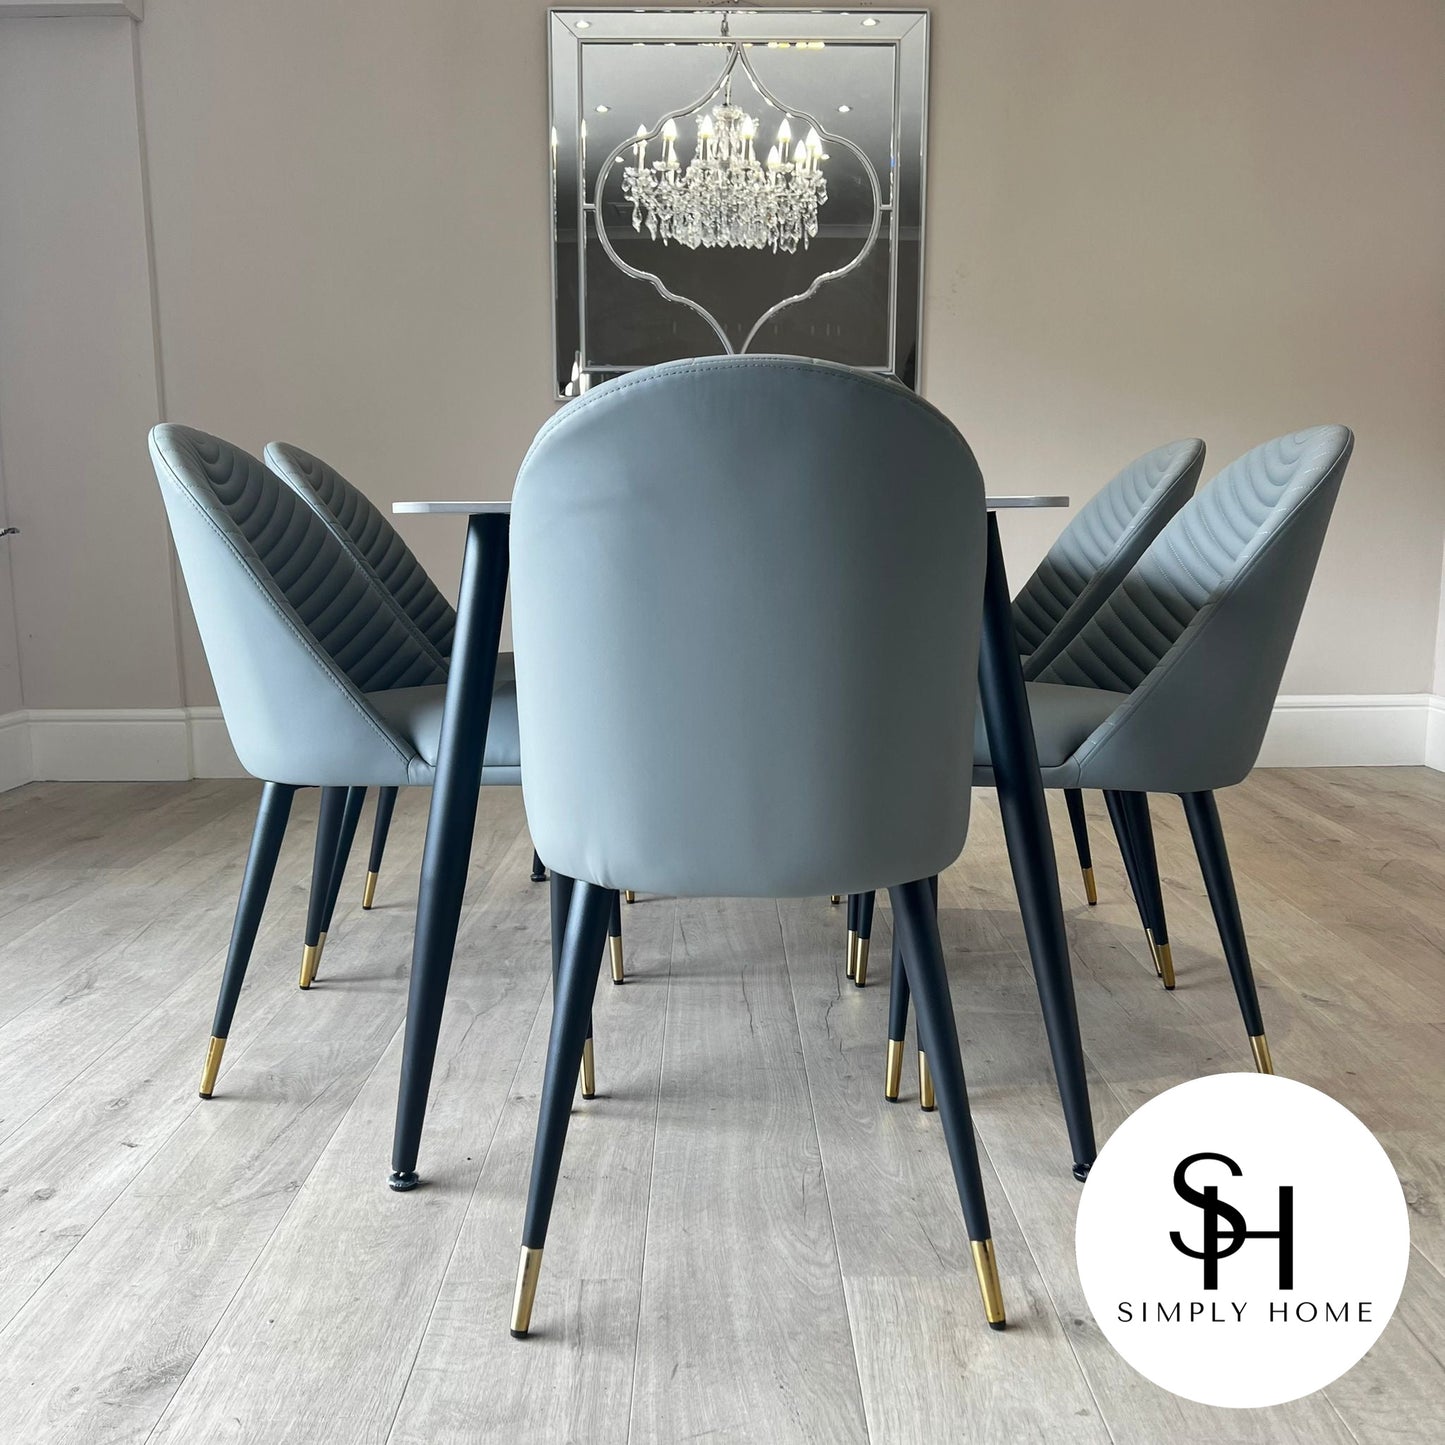 Terra Grey Marble Dining Table with Light Grey Alberto Chairs